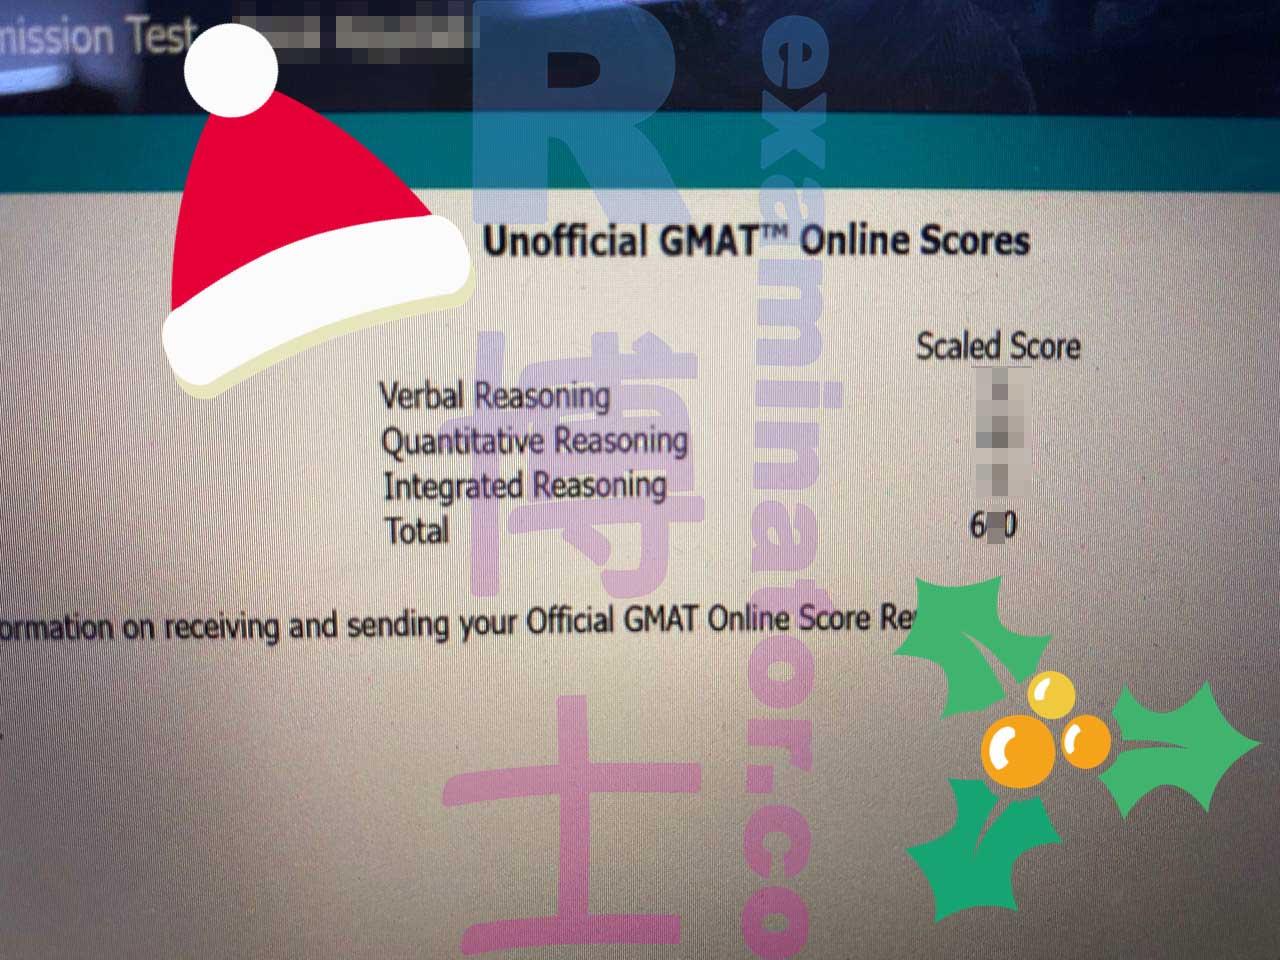 score image for GMAT Cheating success story #429